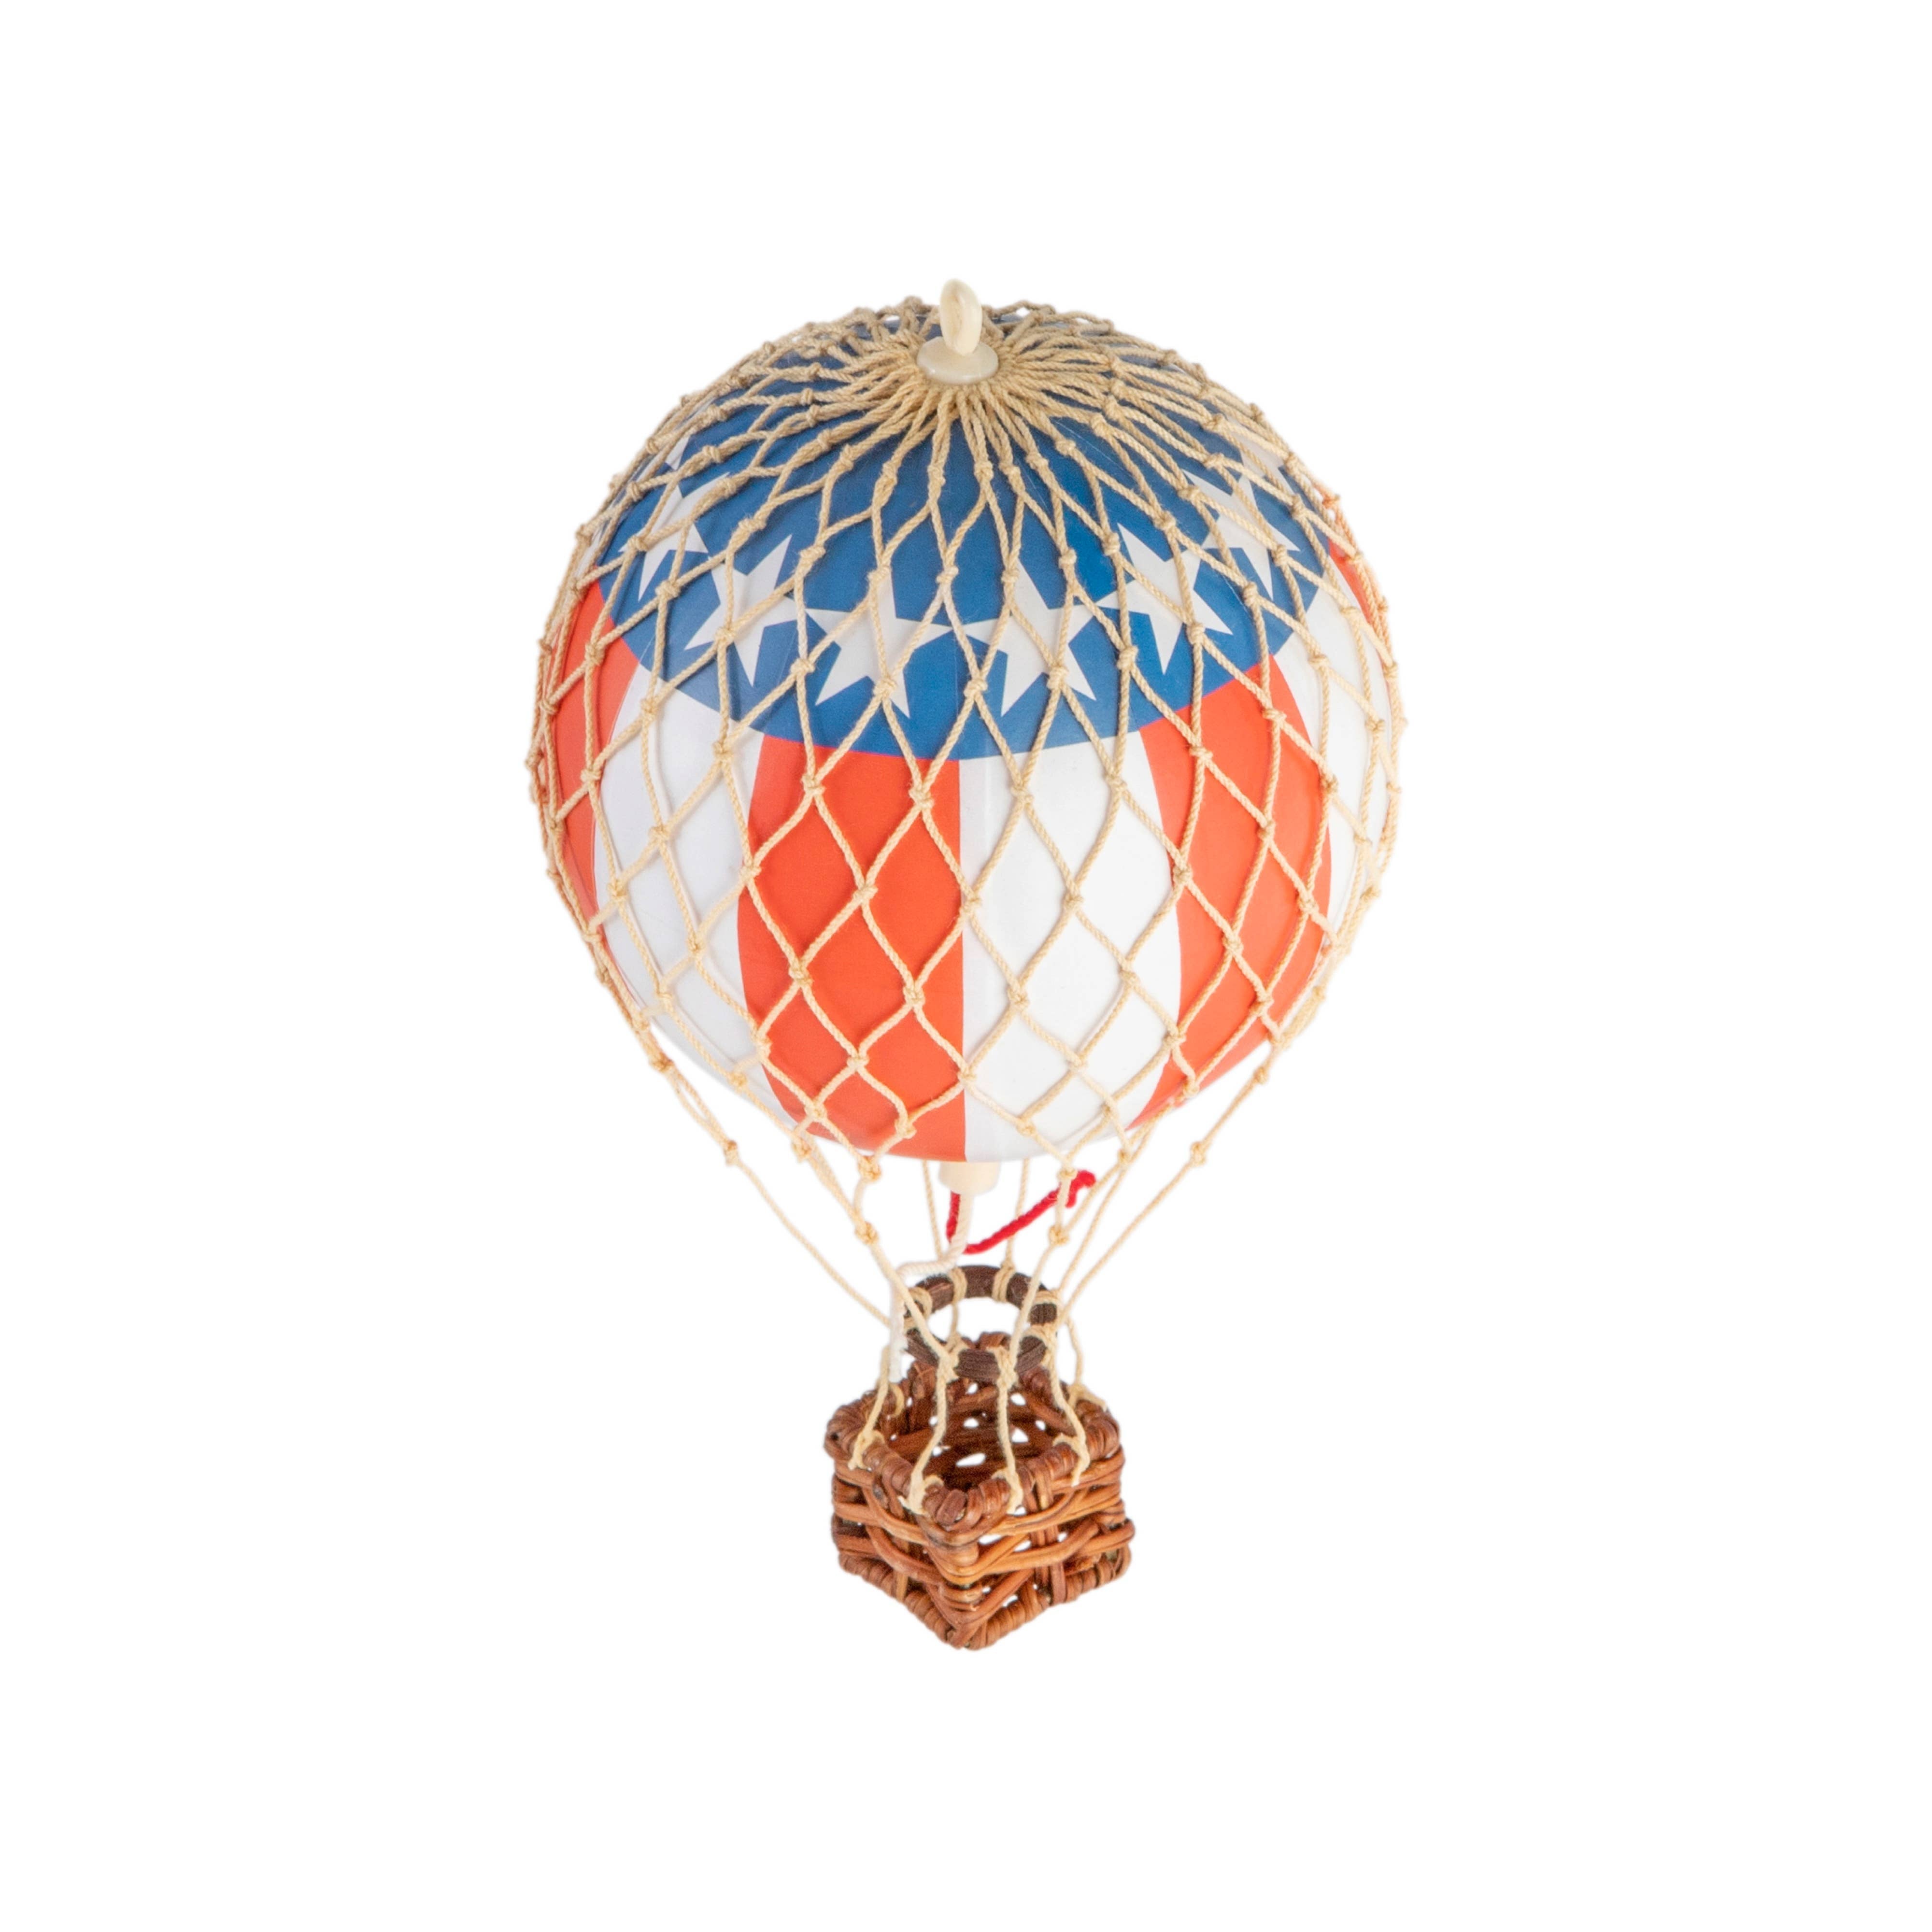 Floating The Skies Hot Air Balloon - USA by Authentic Models - Harold&Charles